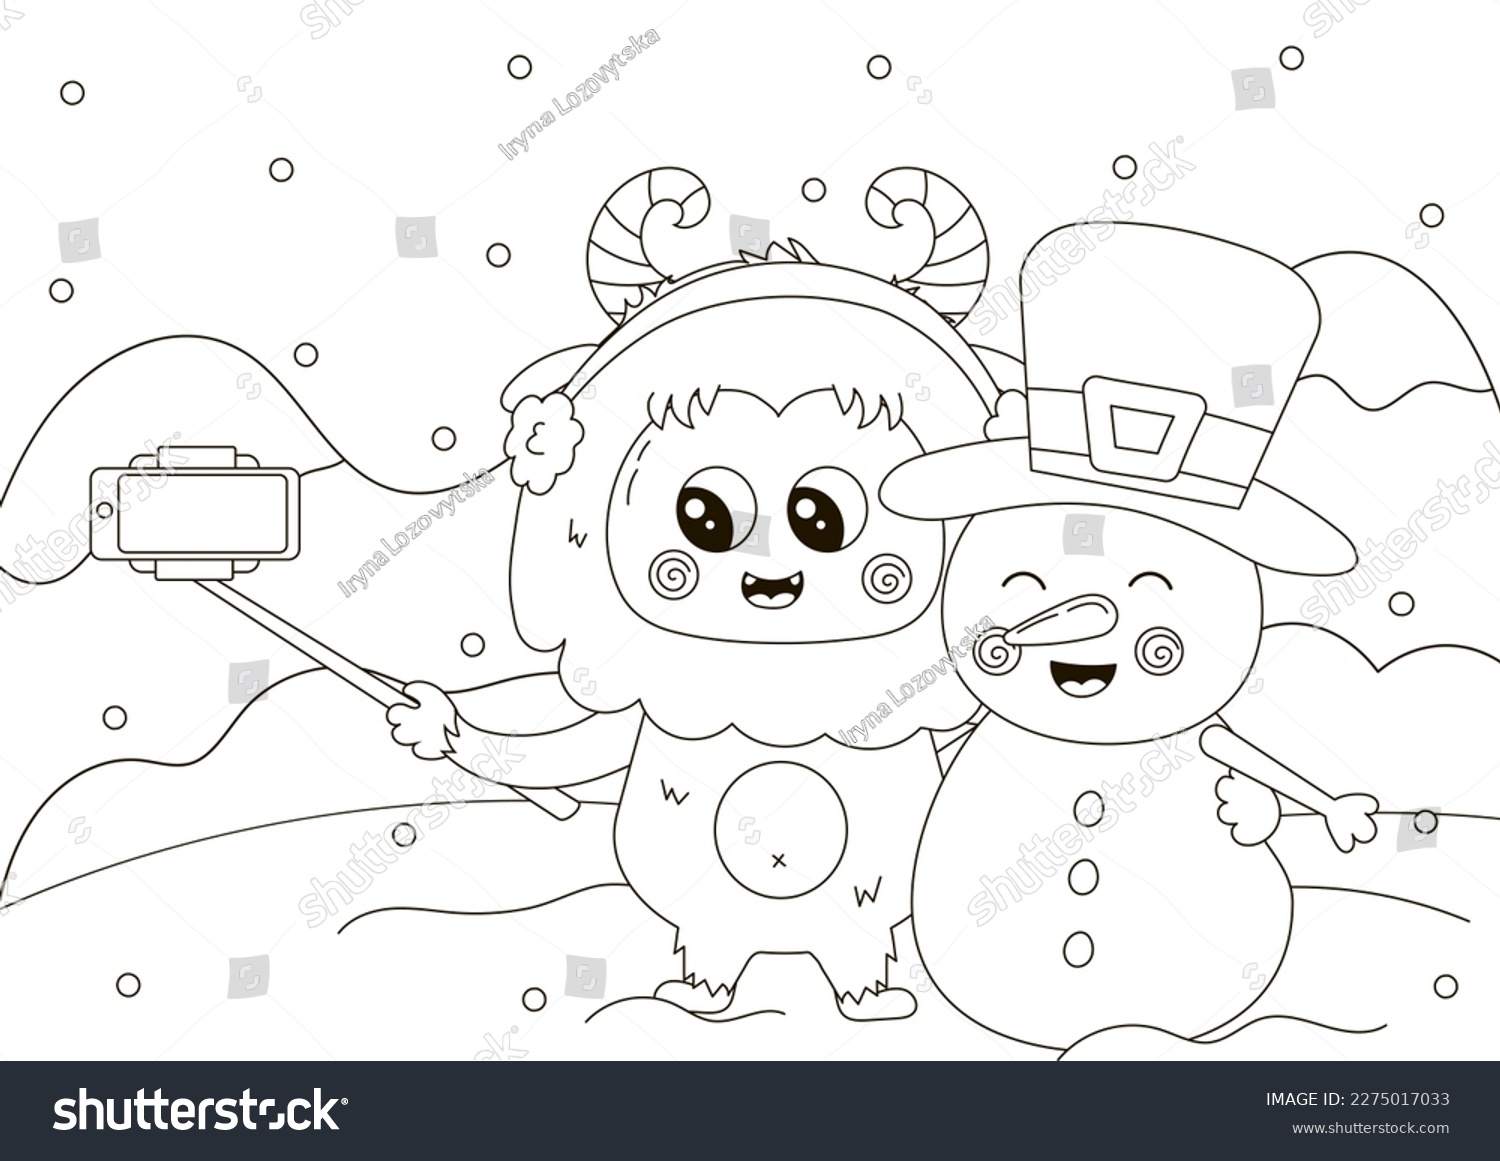 Funny coloring page cute yeti character stock vector royalty free